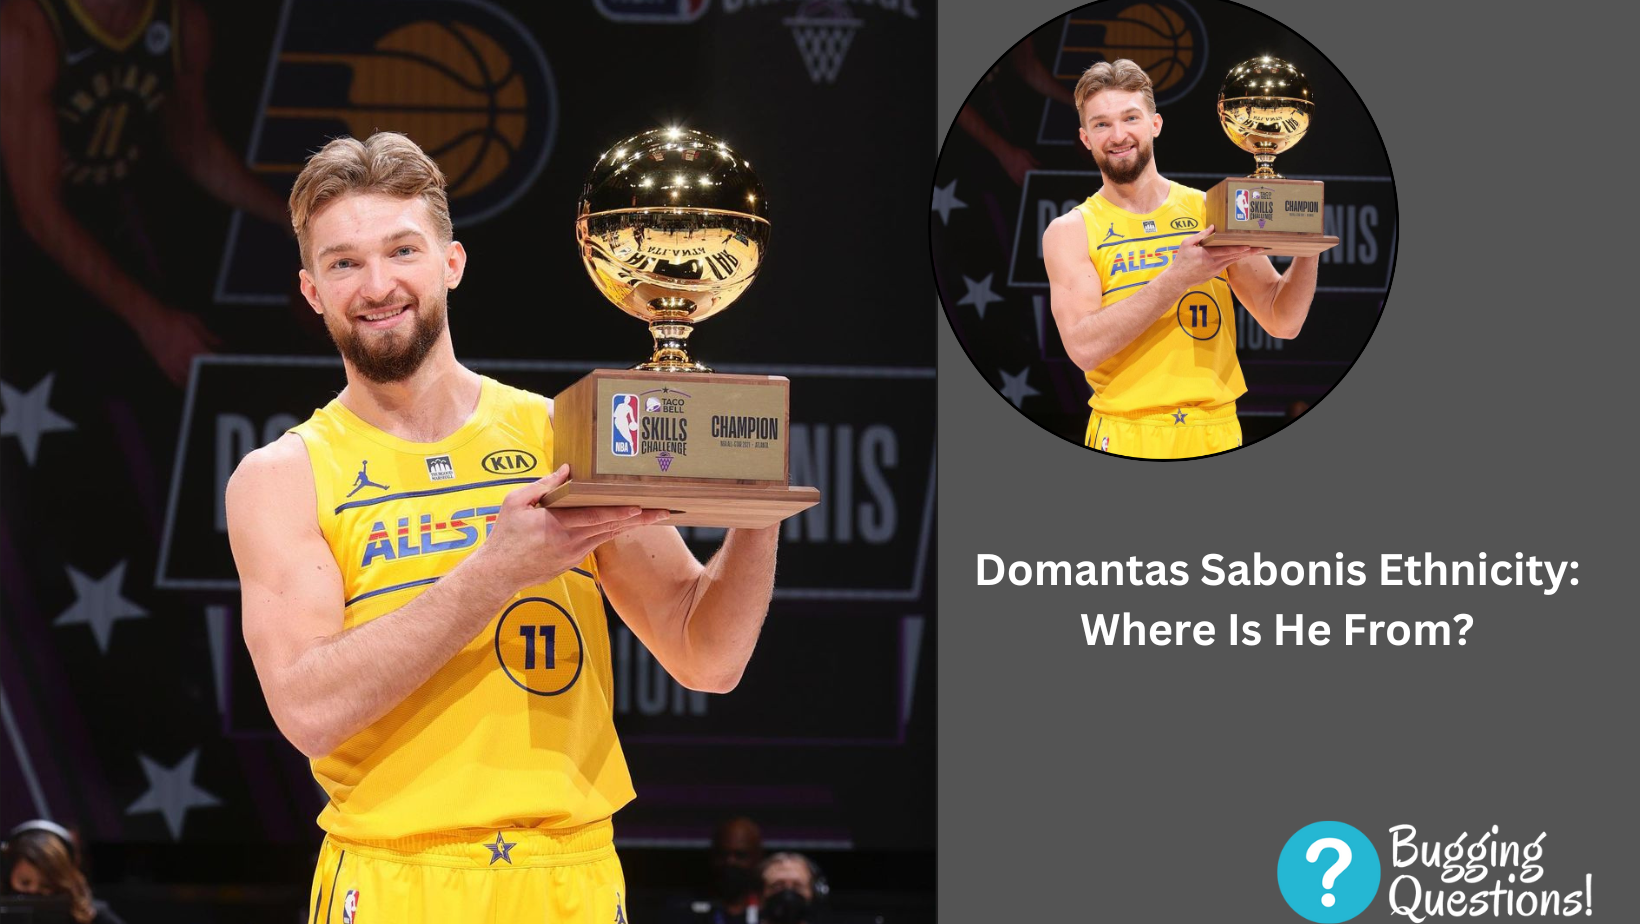 Domantas Sabonis Ethnicity: Where Is He From?